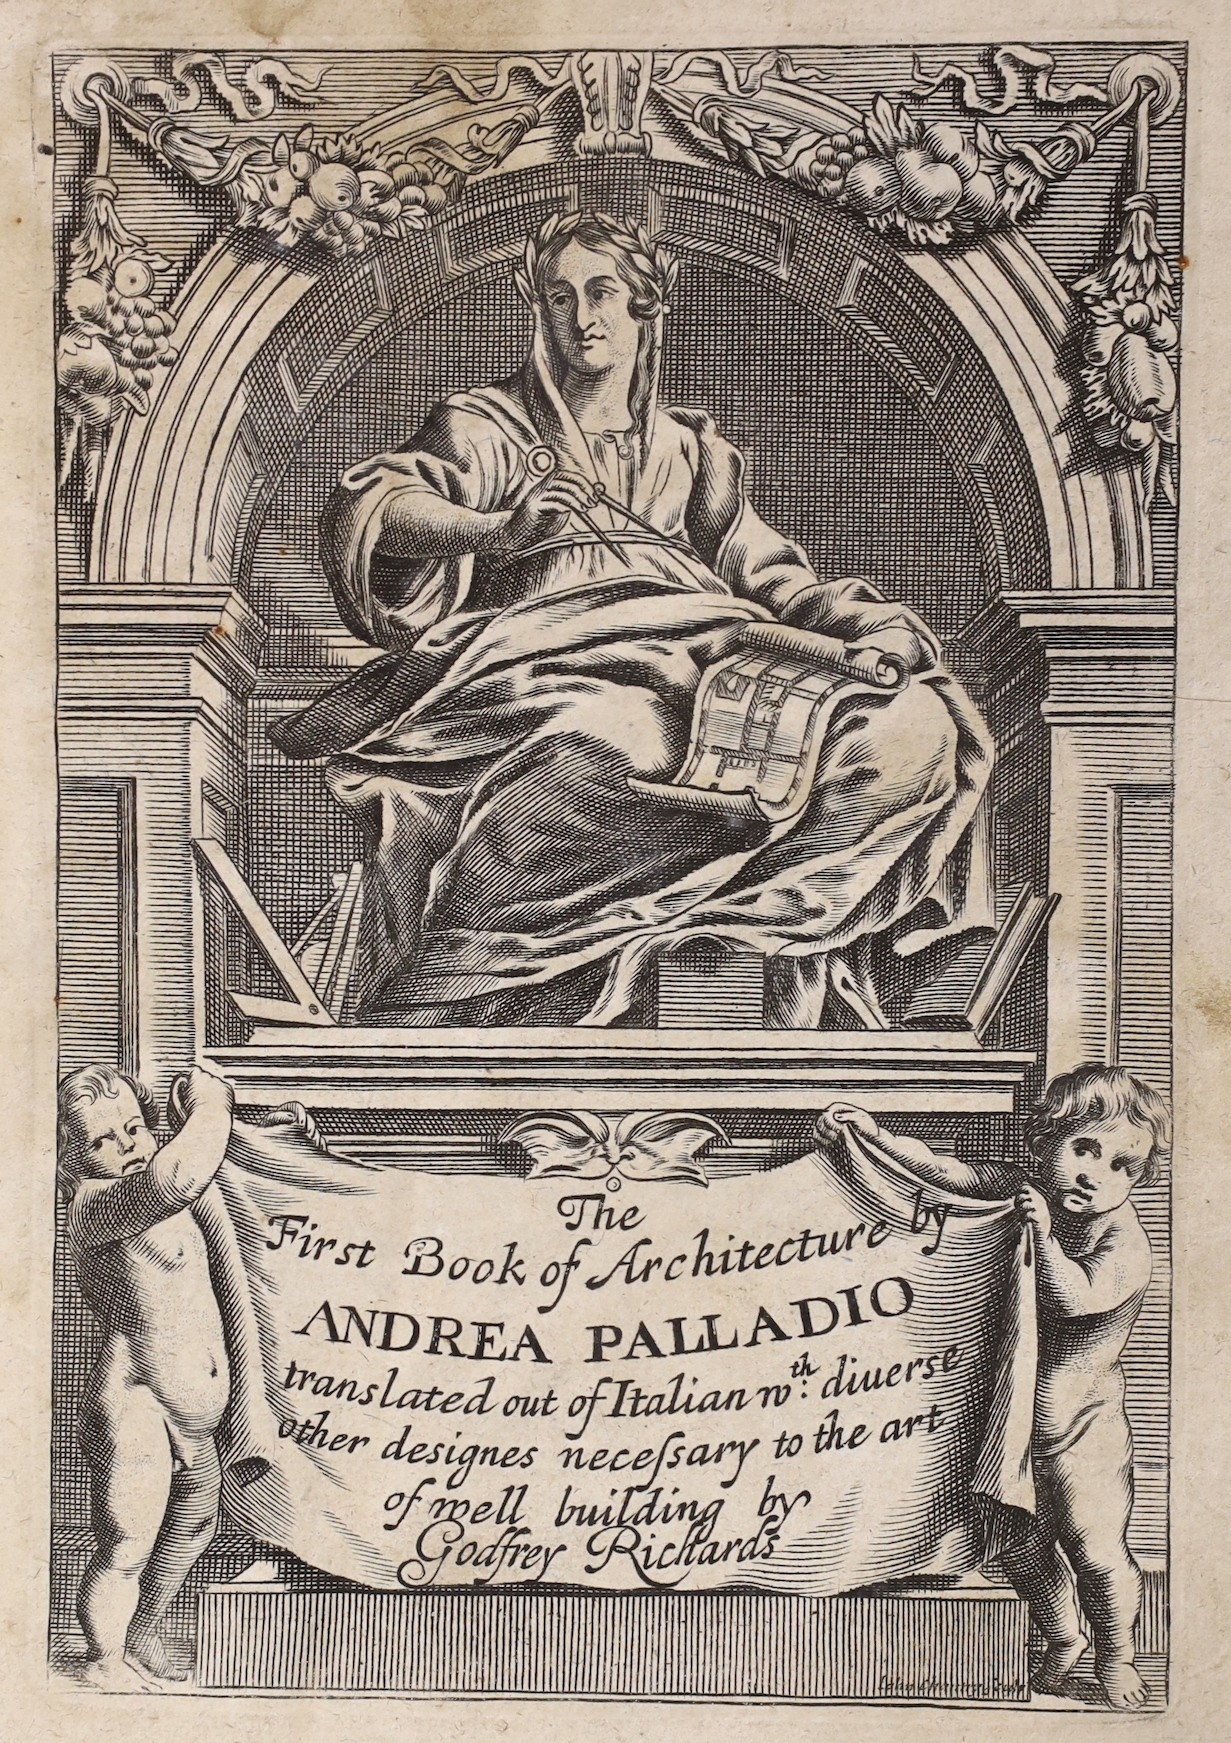 The First Book of Architecture, by Andrea Palladio. Translated out of Italian, with an appendix touching doors and windows, by Pr. Lemuet, Architect to the French king                                                     